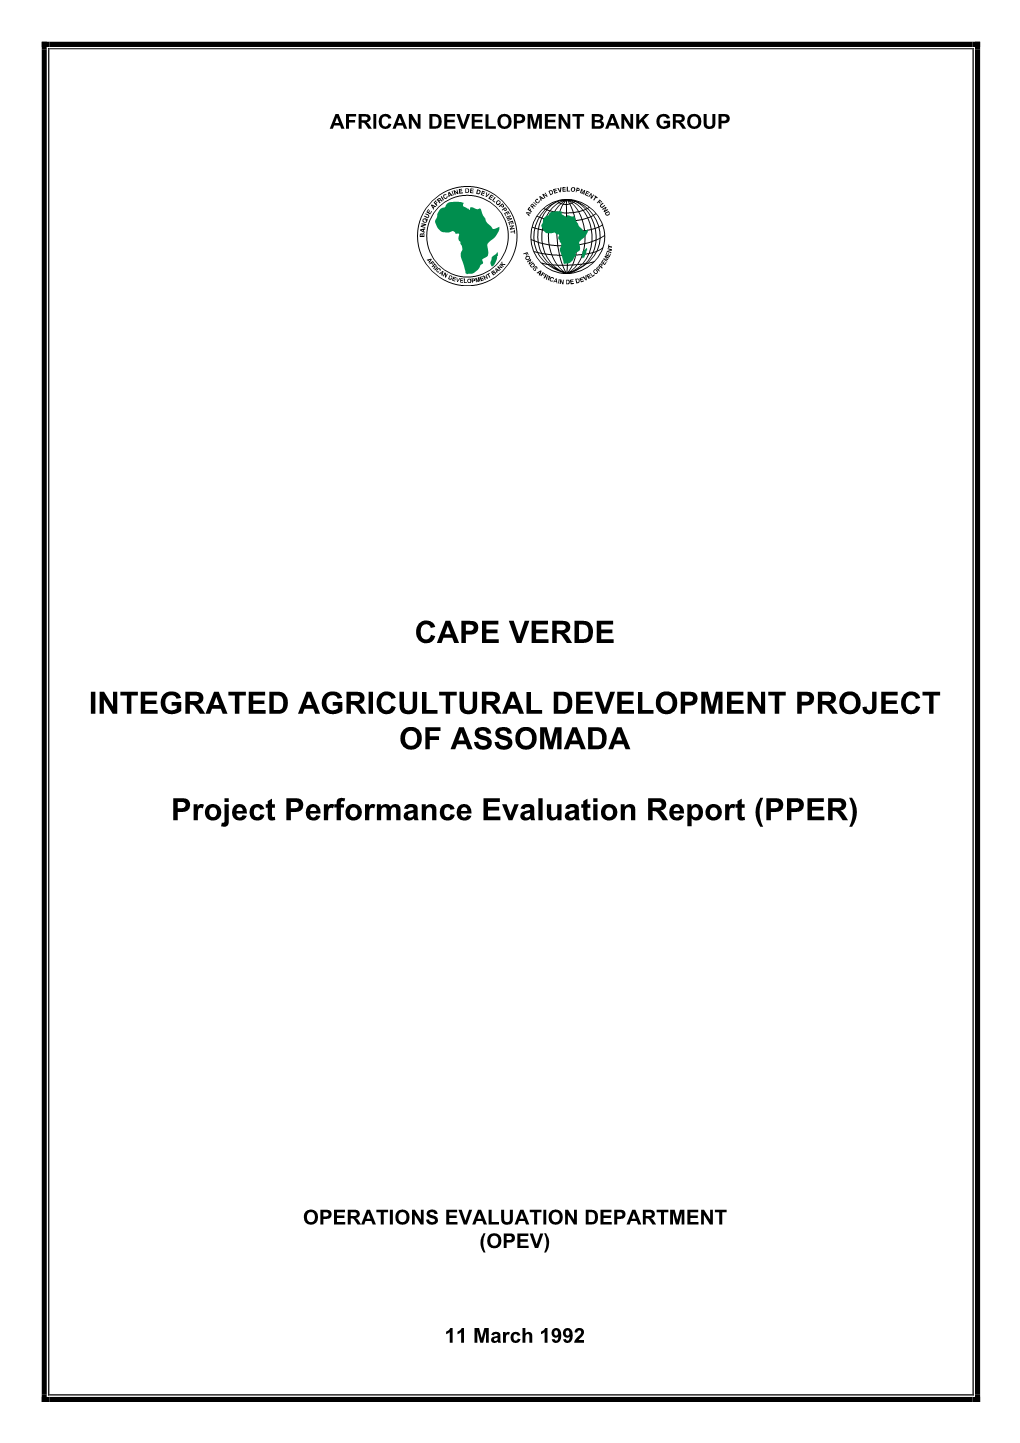 Cape Verde: Integrated Agricultural Development Project of Assomada